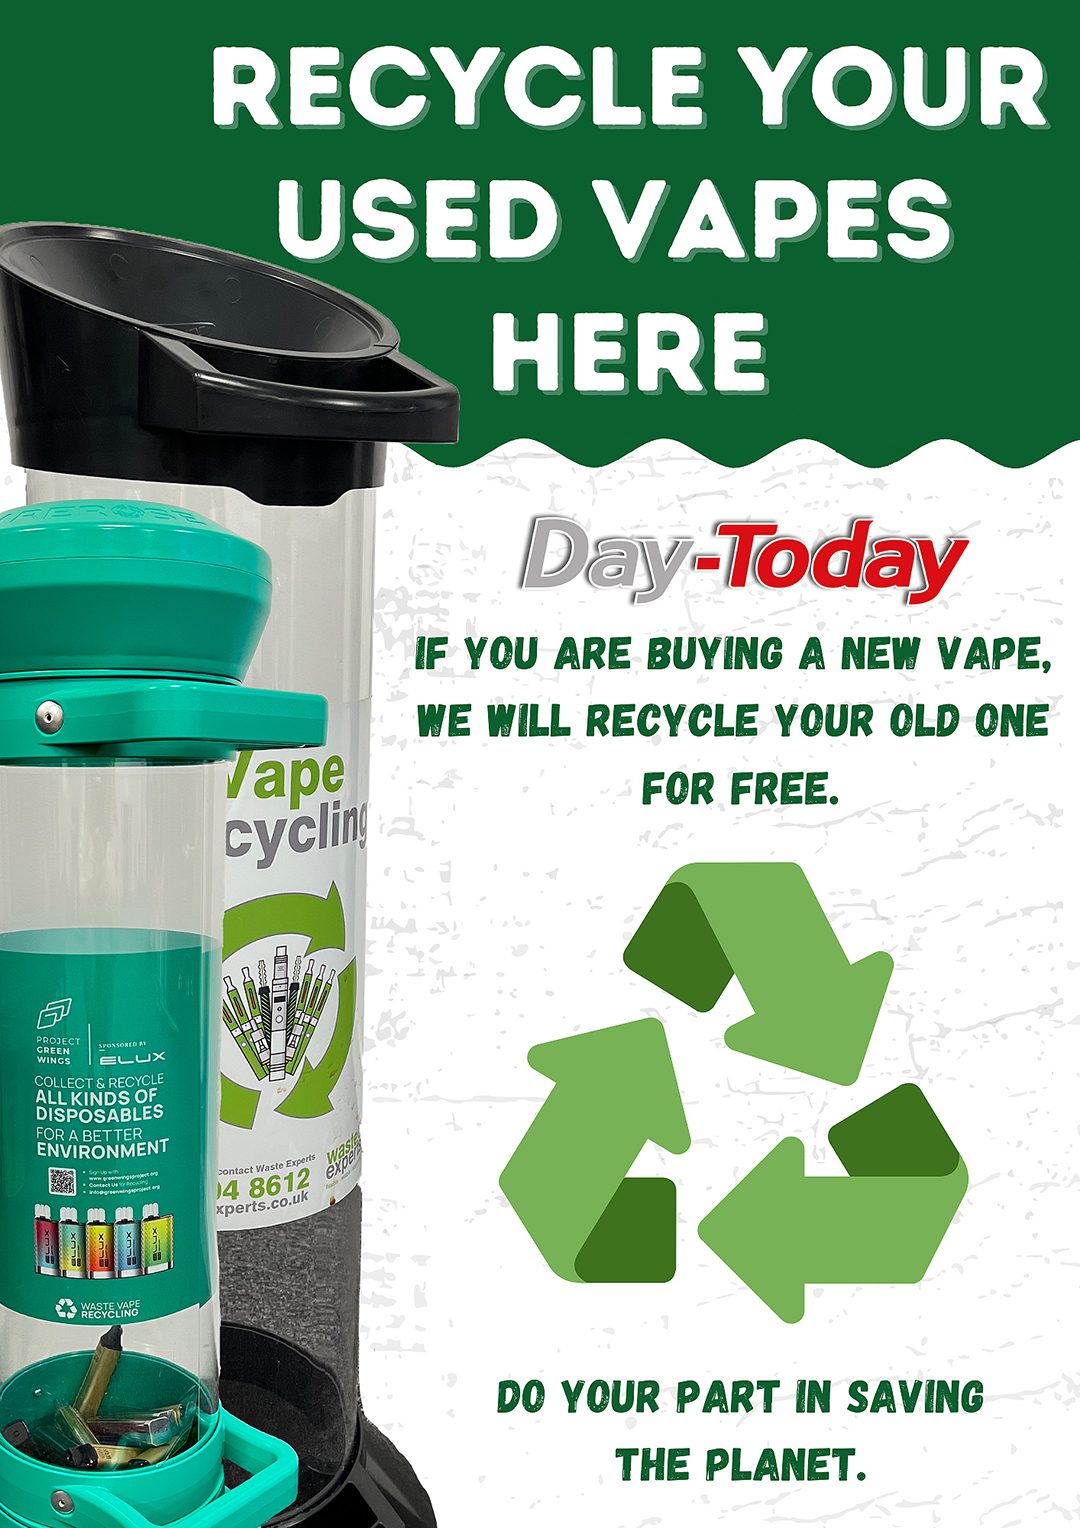 Poster for United Wholesale Scotland's new vape recycling bins. Text states: "Recycle your used vapes here. Day-Today. If you are buying a new vape, we will recycle your old one for free. Do your part in saving the planet.